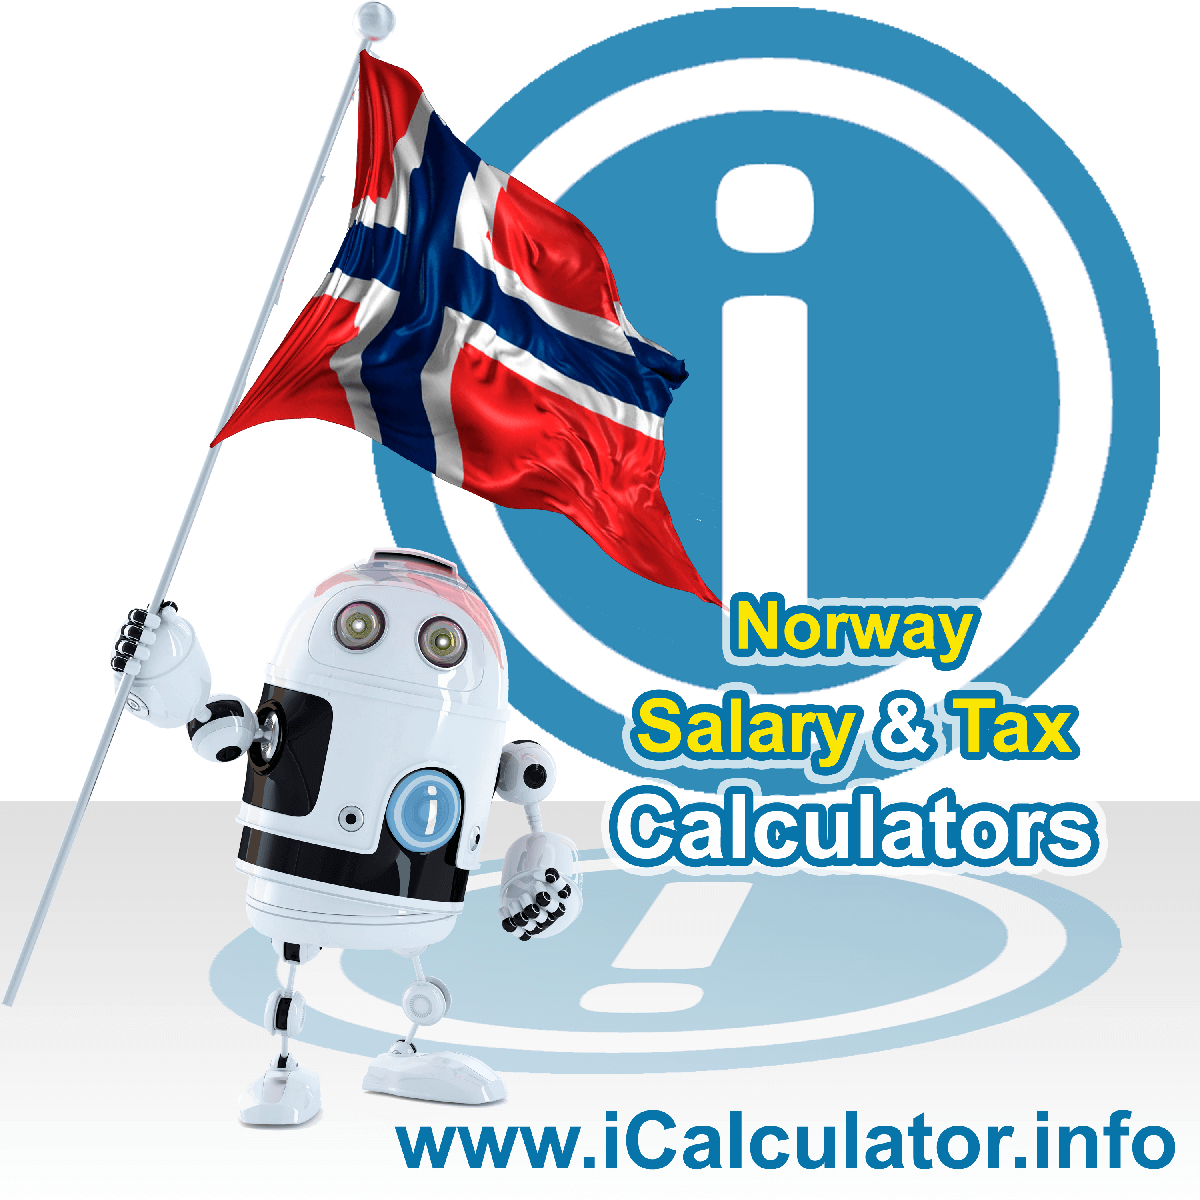 Norway Wage Calculator. This image shows the Norway flag and information relating to the tax formula for the Norway Tax Calculator